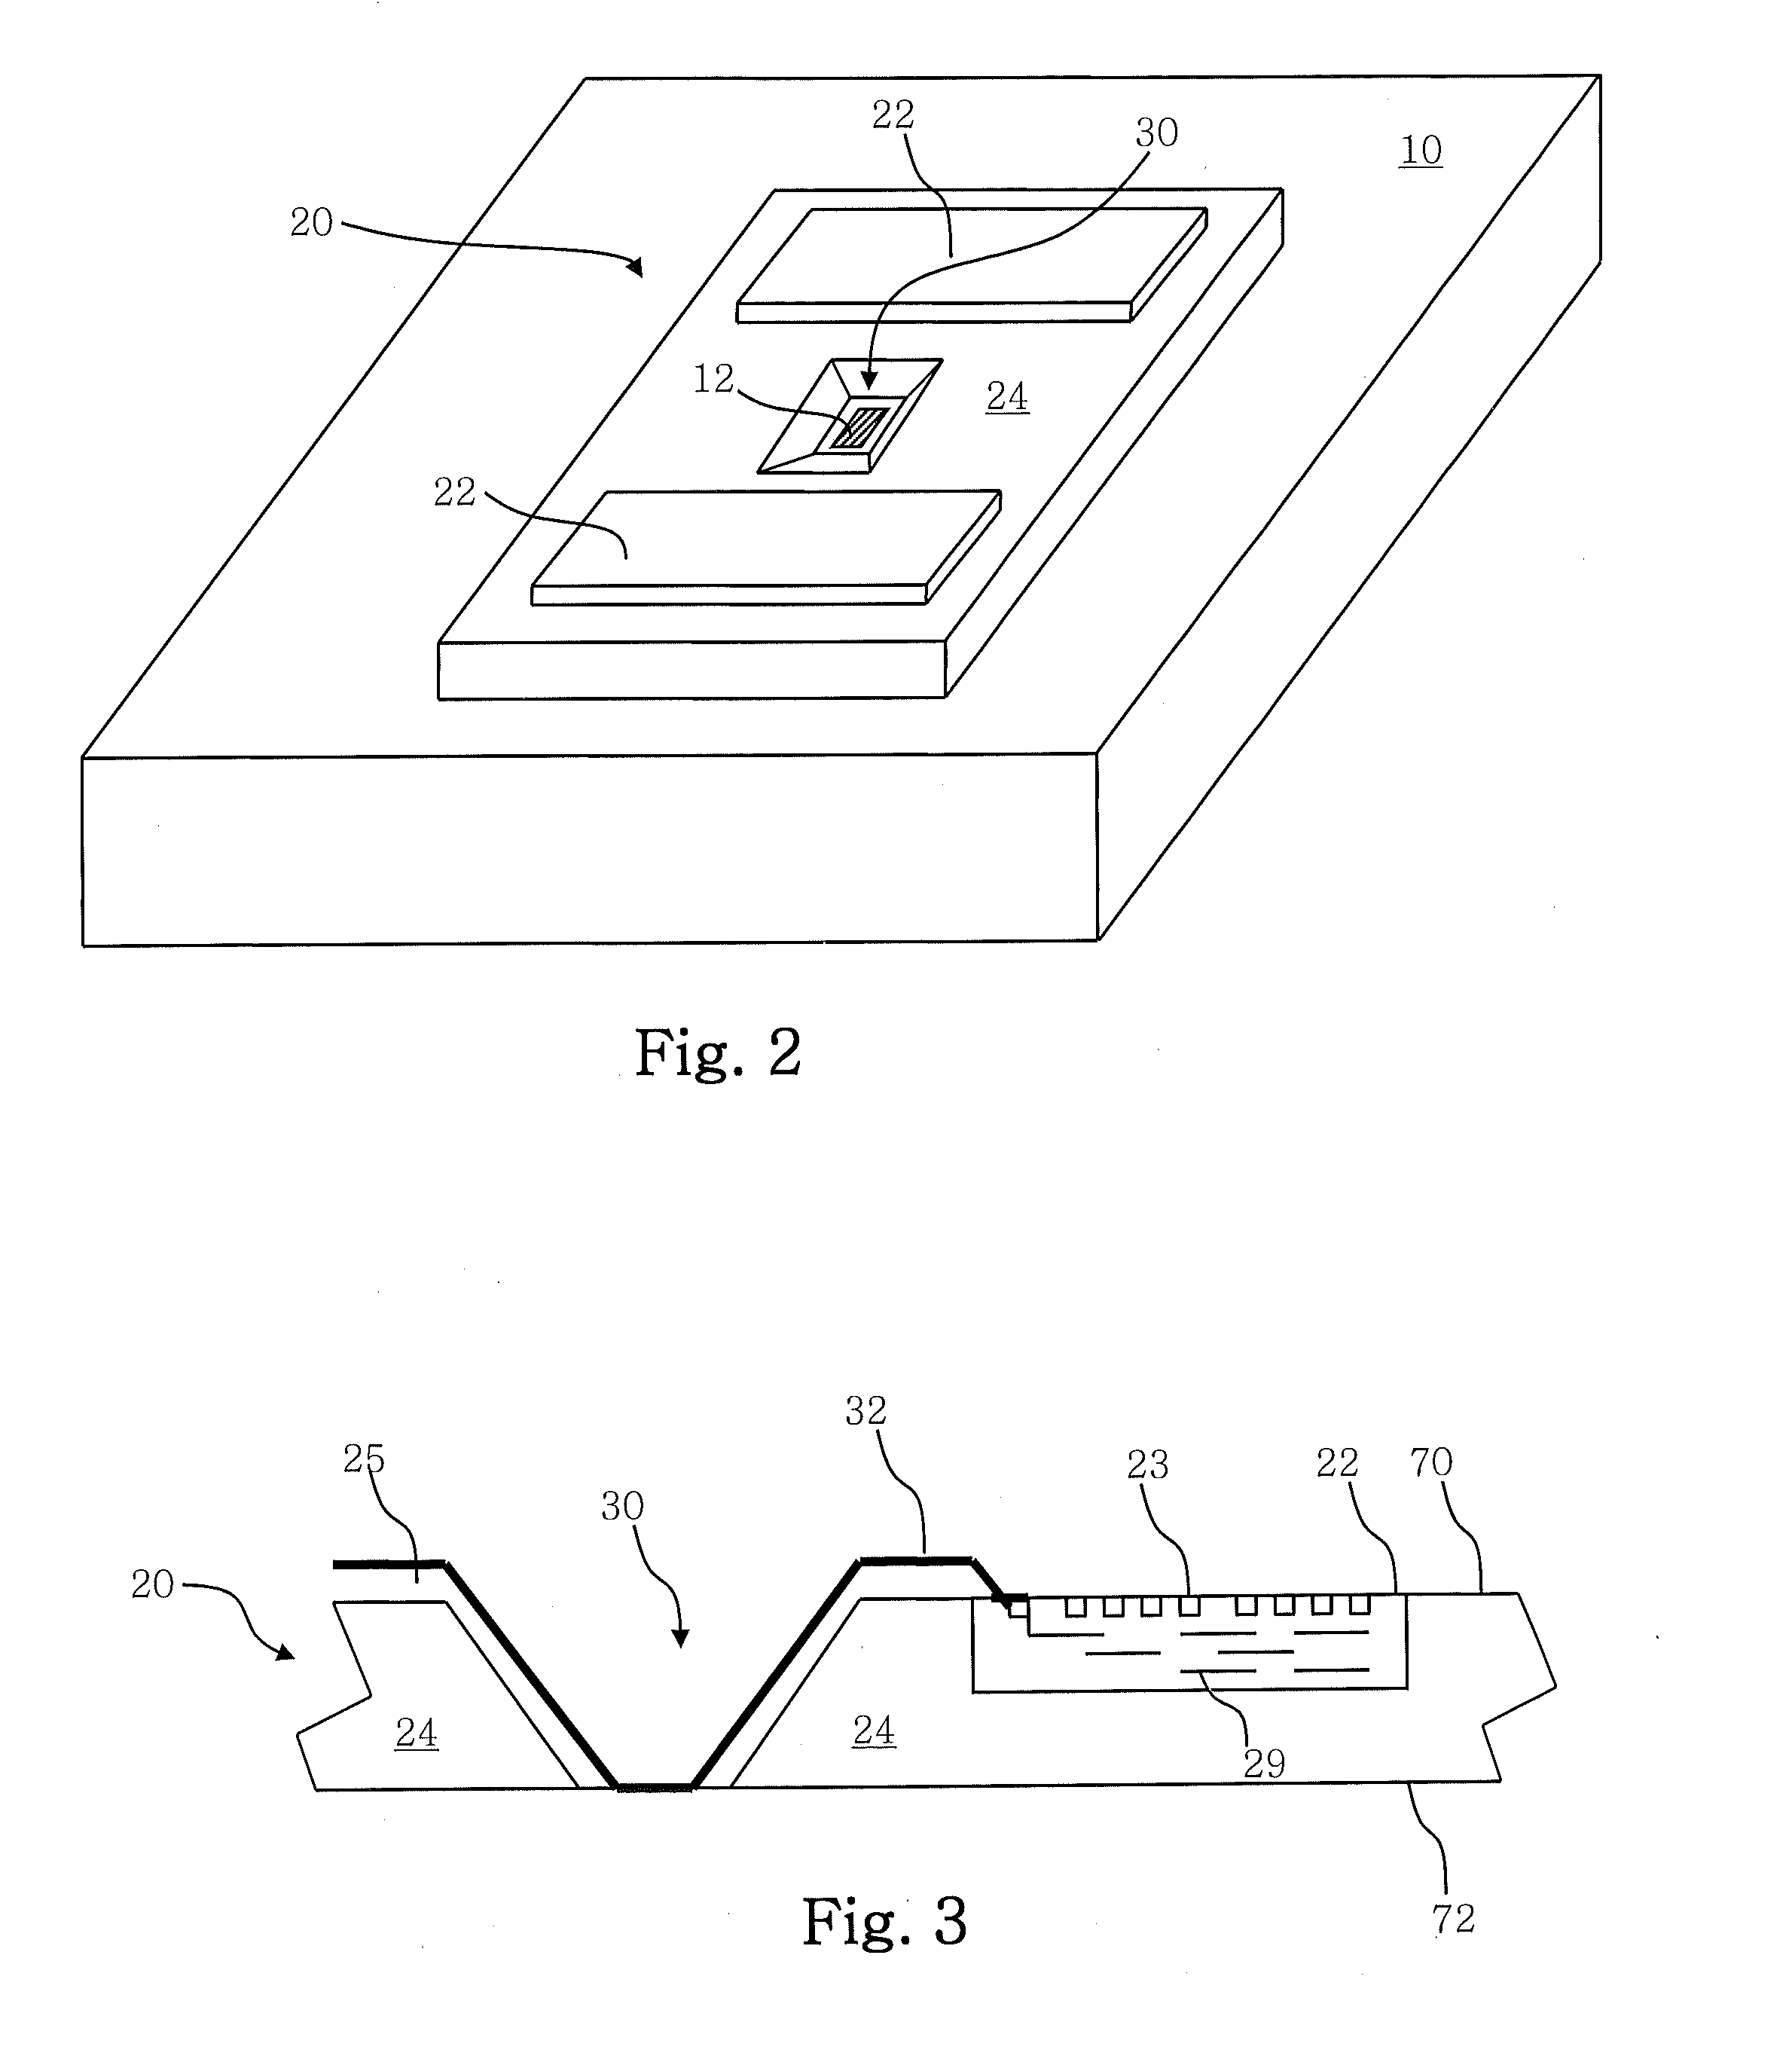 Electrically bonded arrays of transfer printed active components